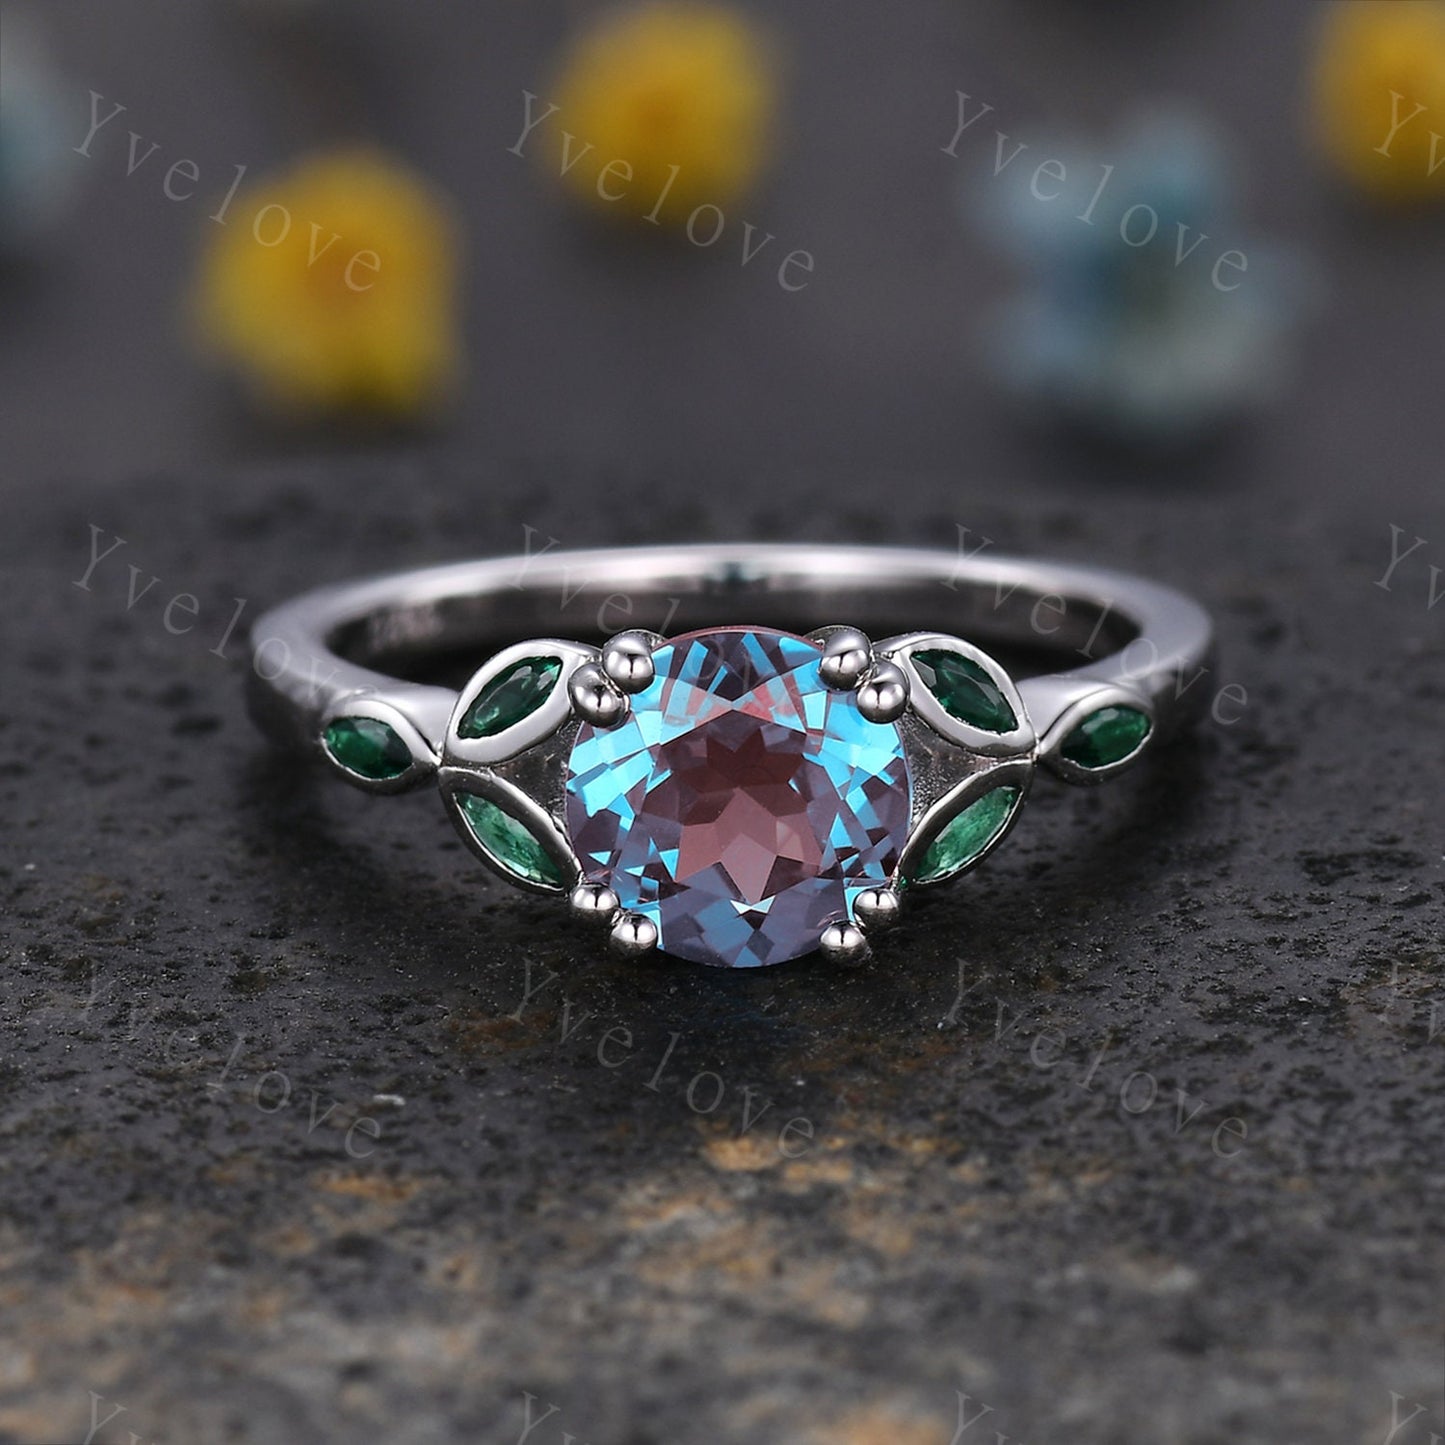 7mm round cut Alexandrite Ring,Vintage Engagement Ring,Color Changing Stone,June Birthstone Ring,Emerald Jewelry Promise Anniversary Ring